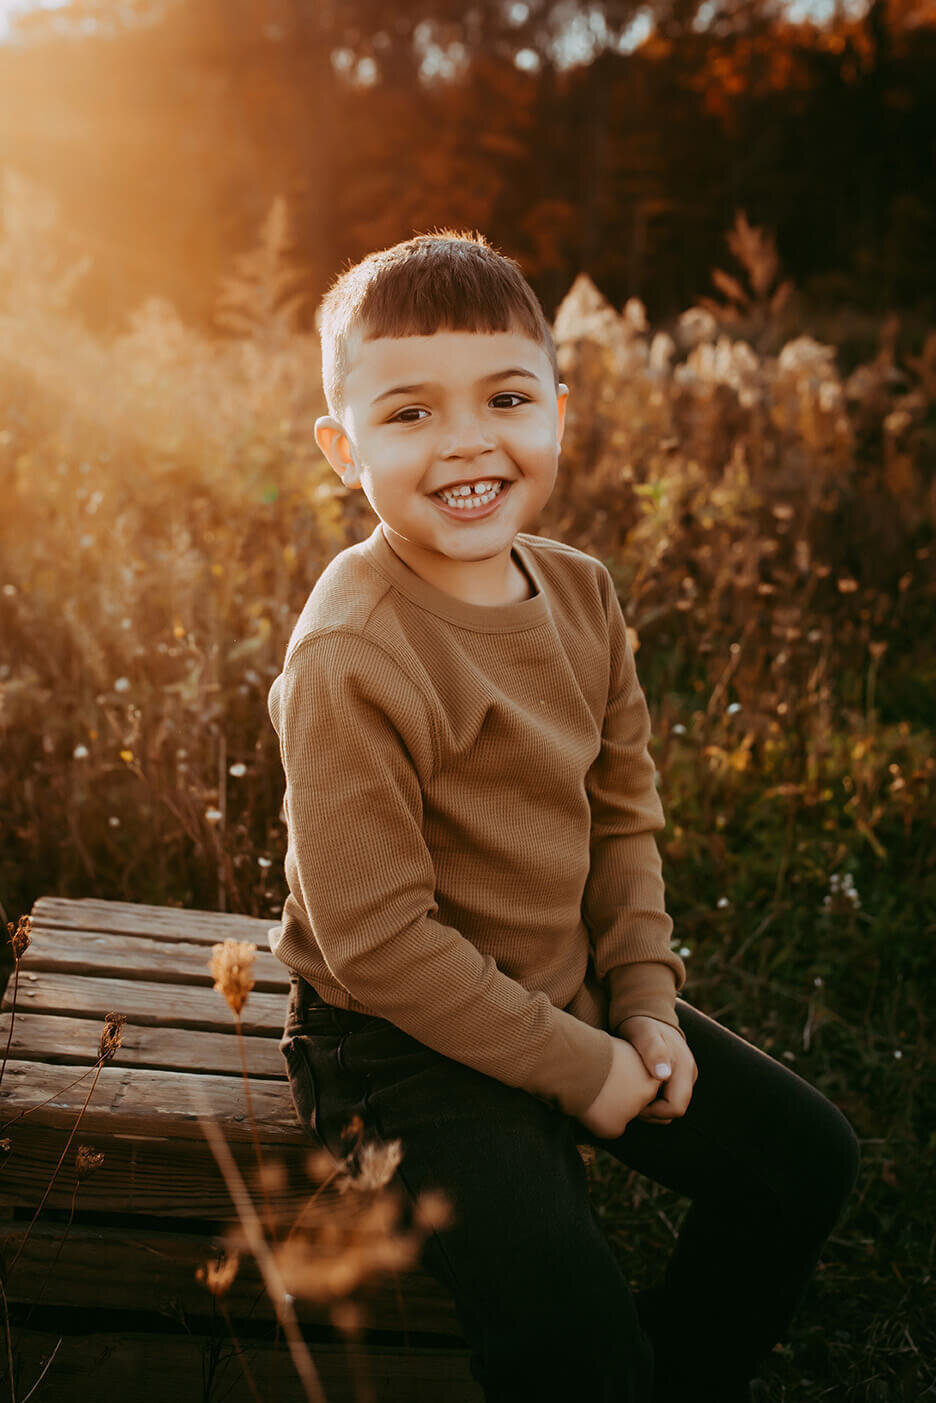 a five year old boy sitting on a wooden crate in a field during golden hour